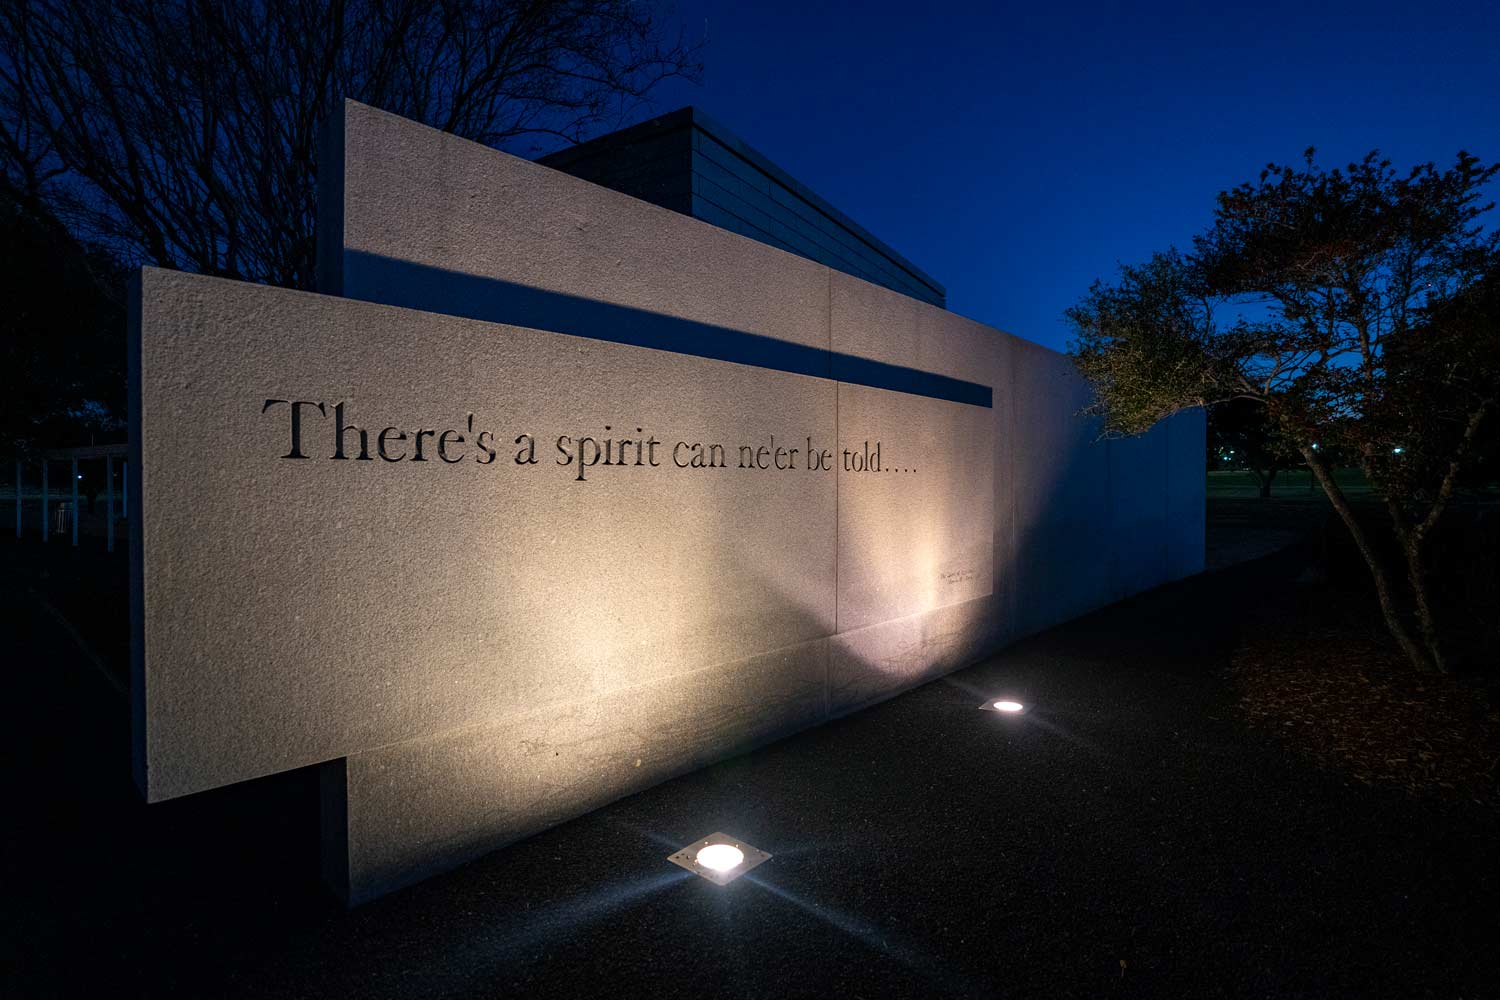 Engraved stone wall reading, "There's a spirit can ne'er be told..."